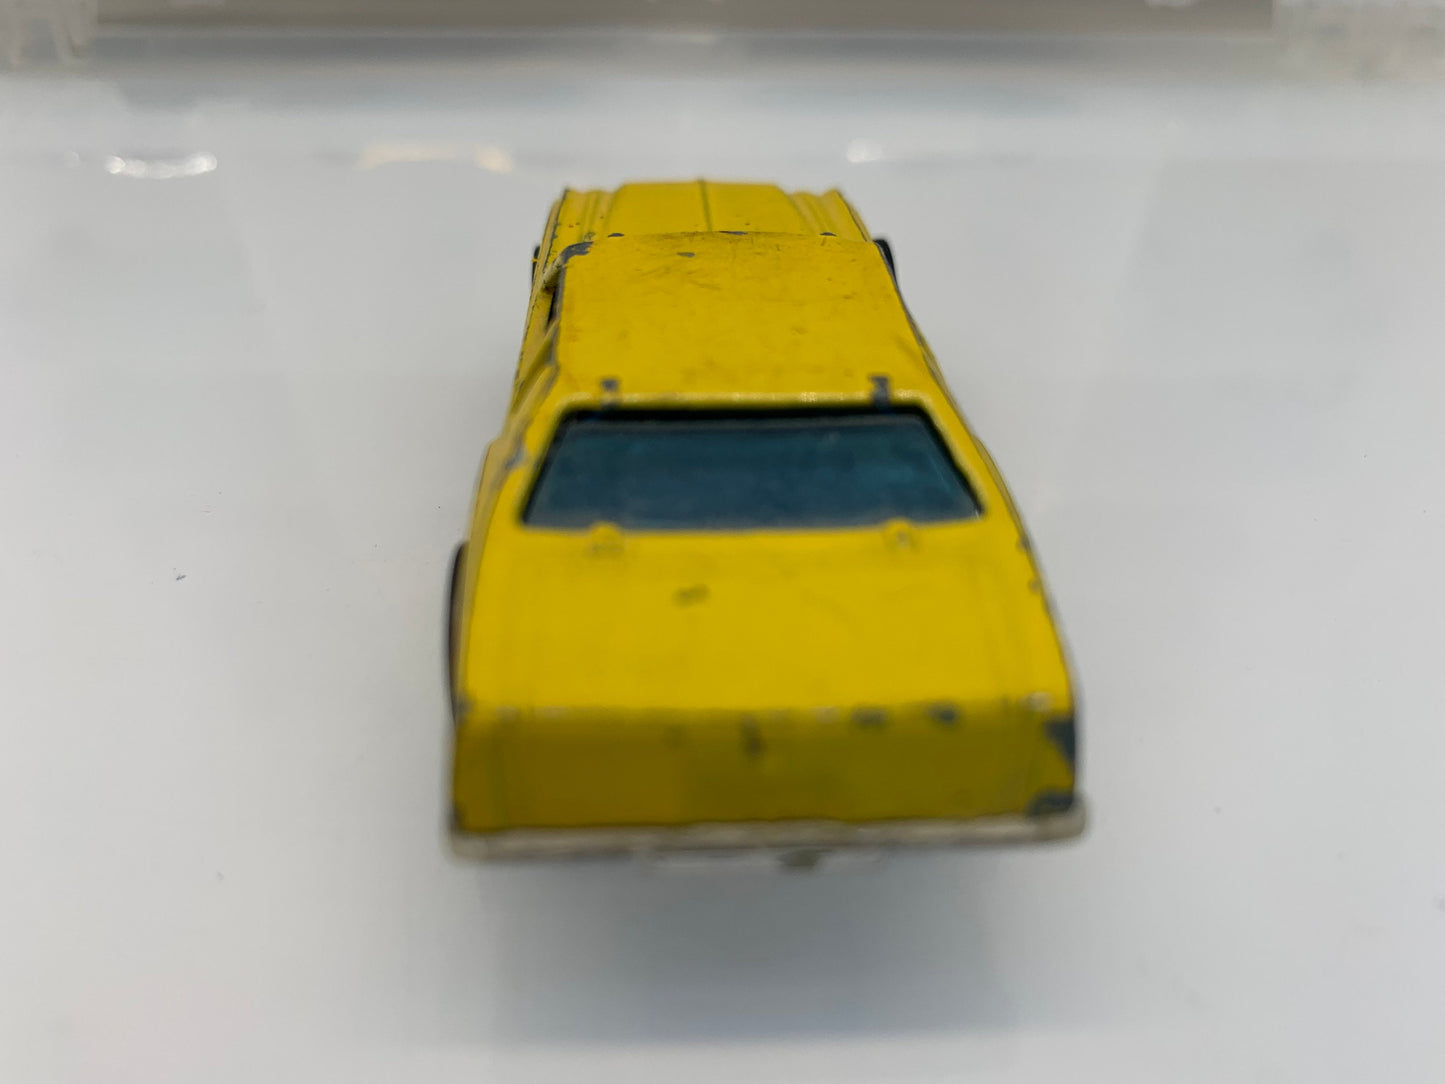 Hot Wheels Redline Monte Carlo Stocker Yellow - Vintage Diecast Metal Cars - Vintage Collectibles - 1970's Toy Cars - Perfect Birthday Gift